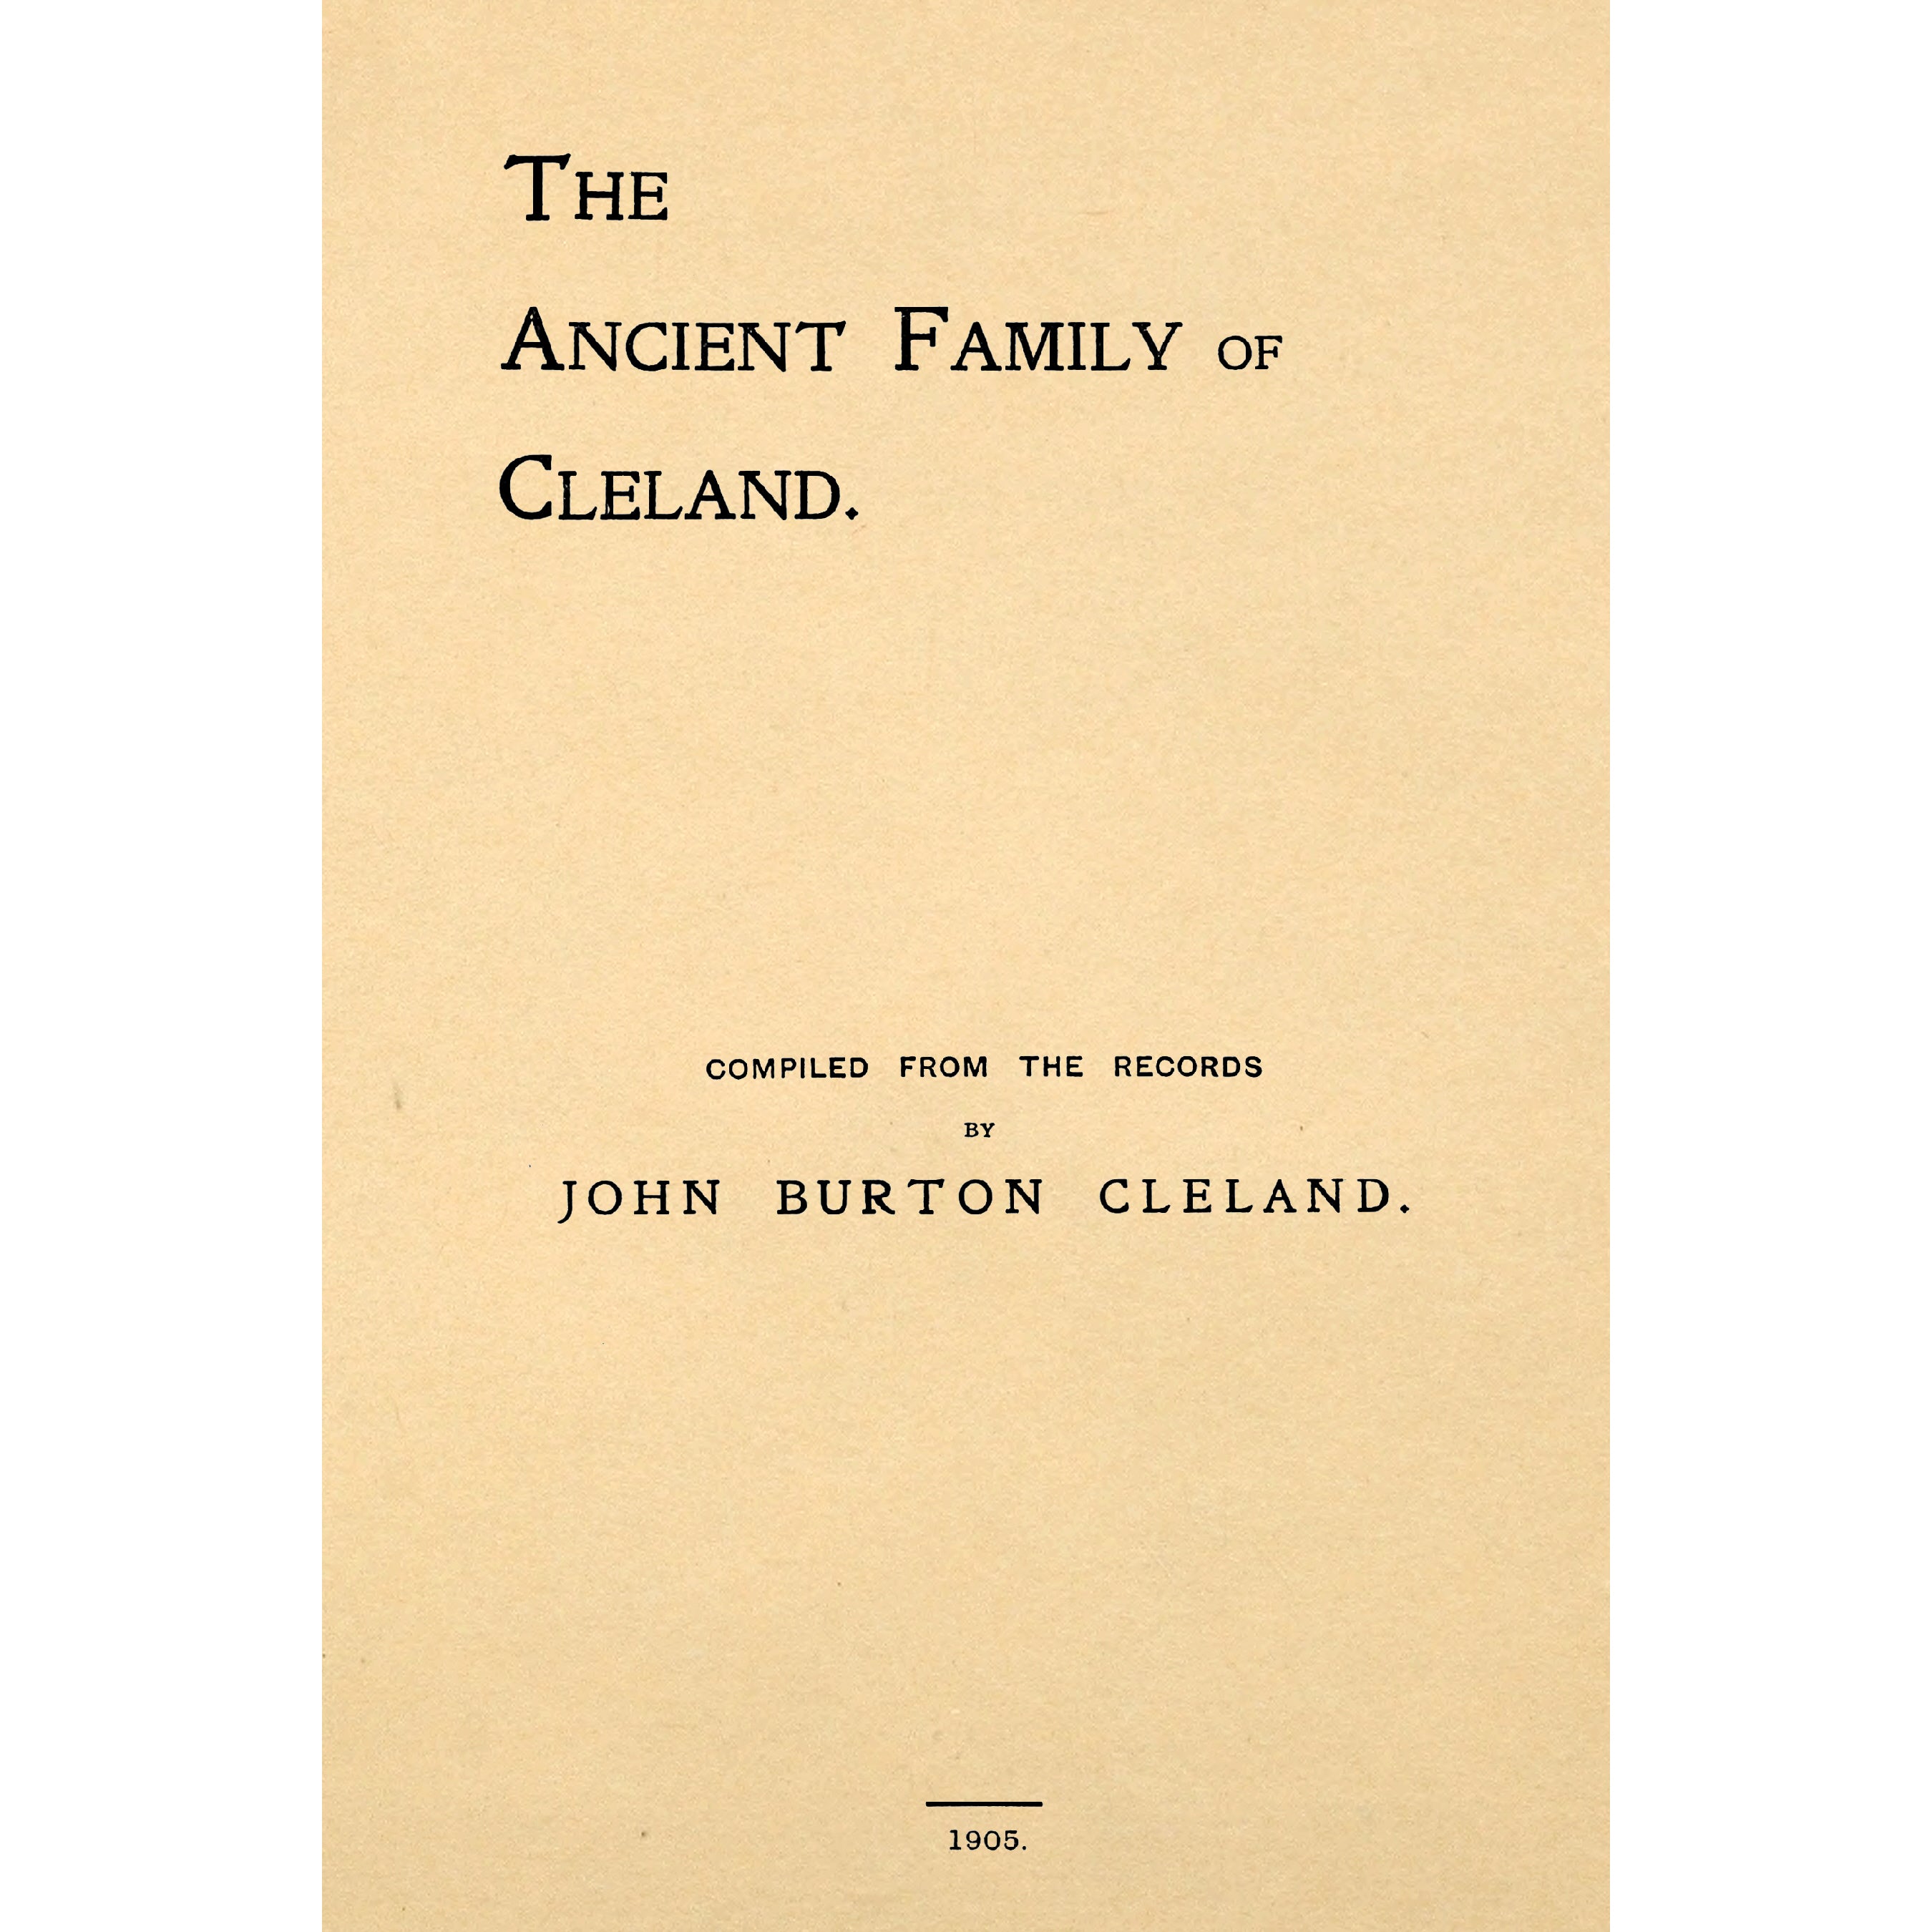 The Ancient Family of Cleland